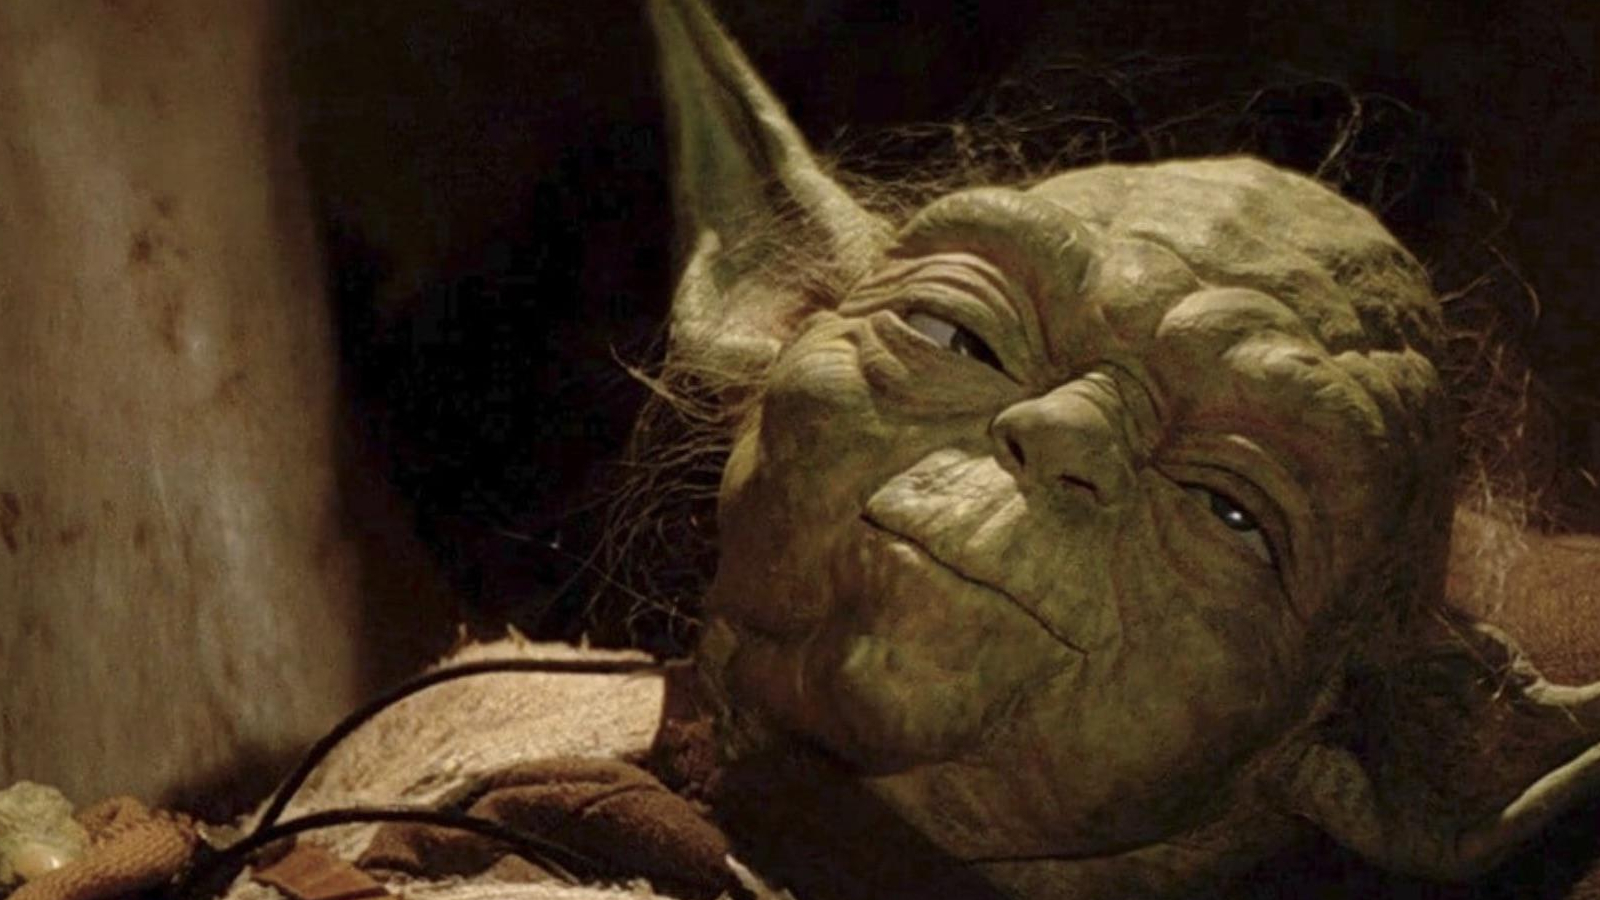 Master Yoda on his deathbed in Star Wars: Return of the Jedi